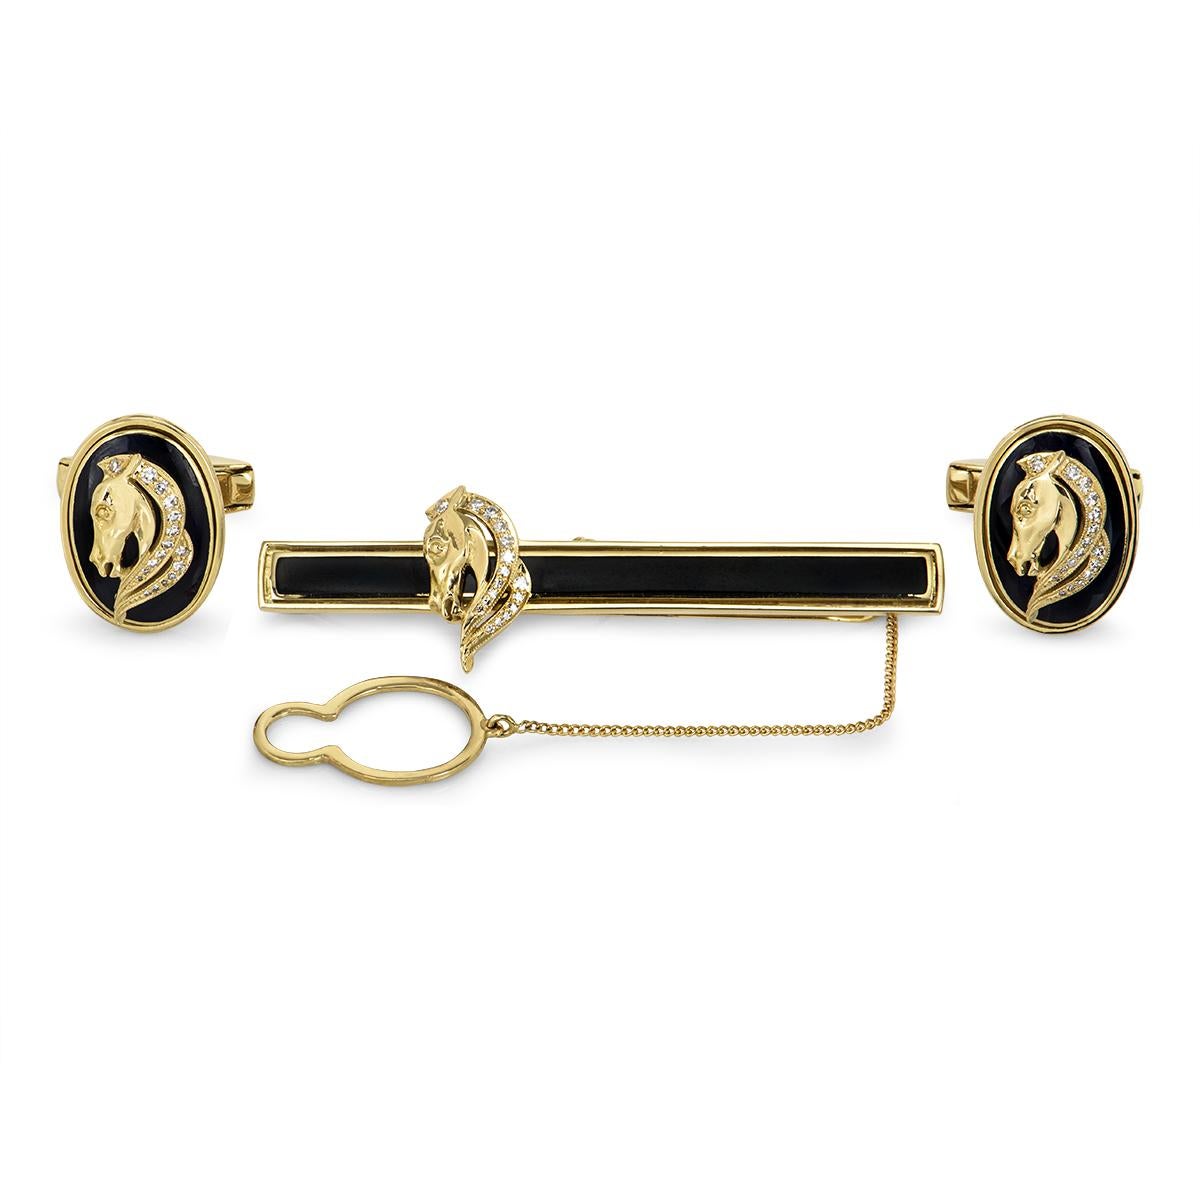 A stunning 18k yellow gold diamond and enamel tie slide and cufflinks set. The 18k yellow gold tie slide is set to the centre with a black enamel inlay featuring a pave set round brilliant cut diamond horse head motif. The tie slide is complemented